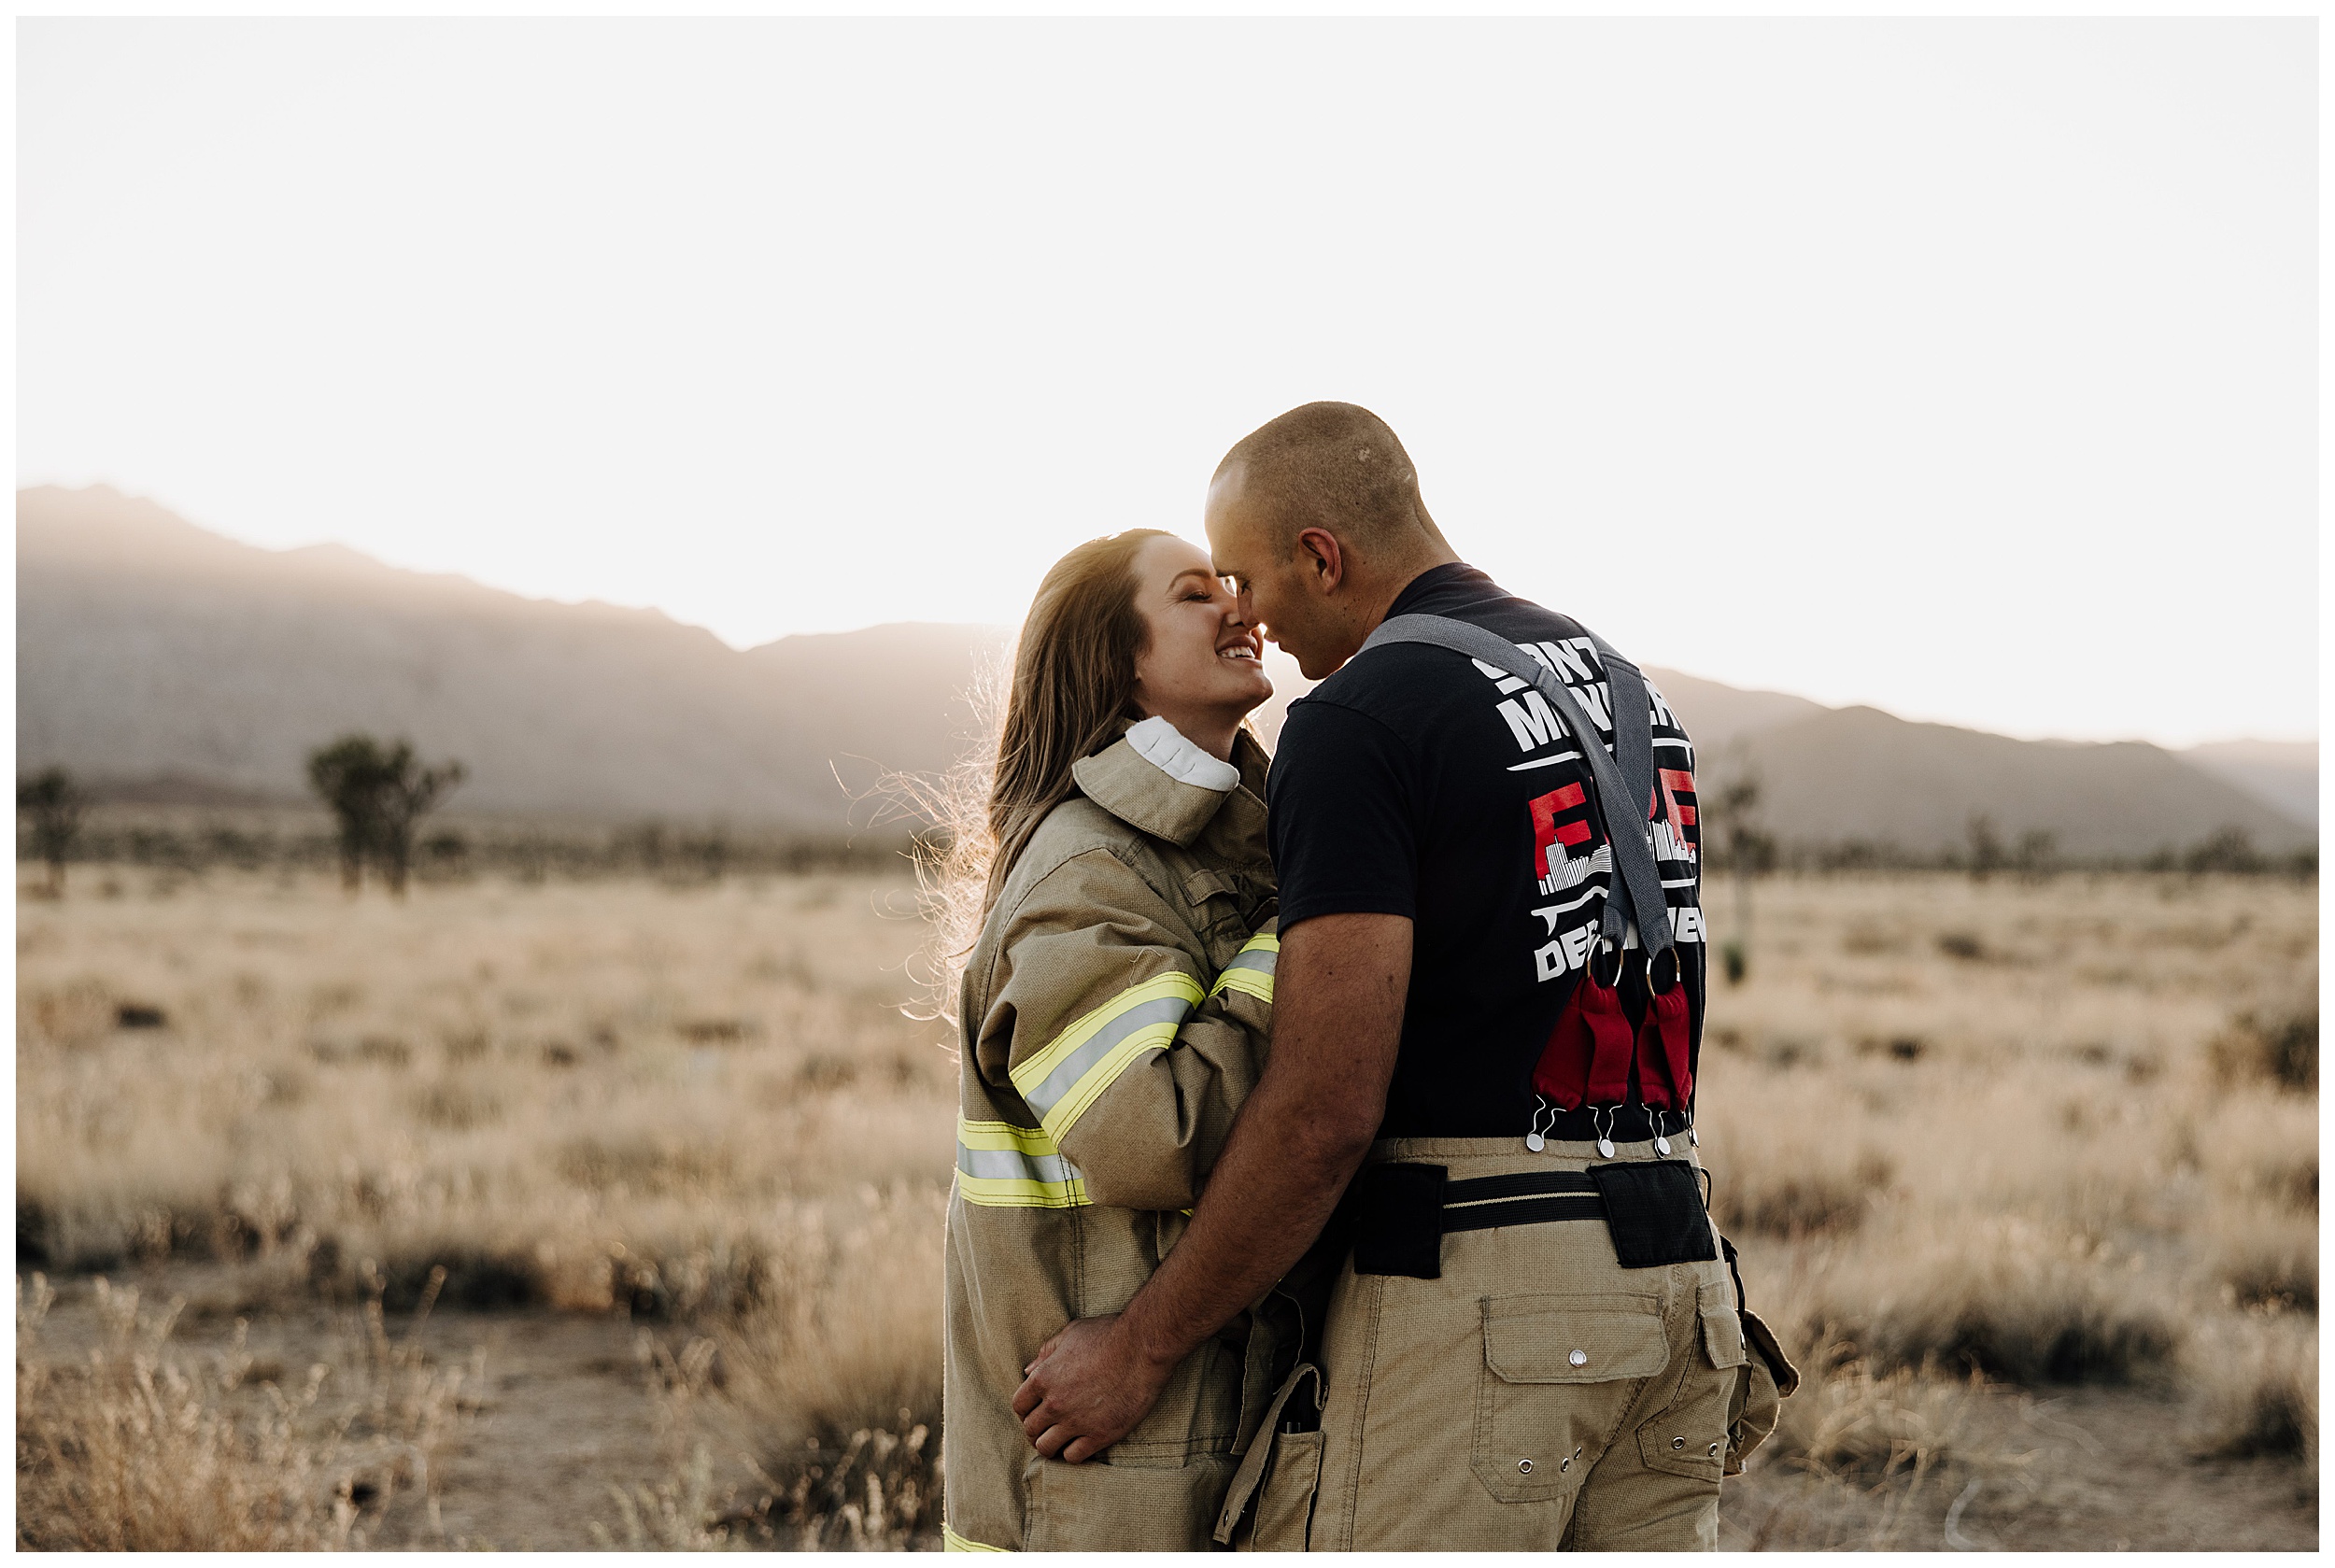 engagement photos with firefighter uniforms